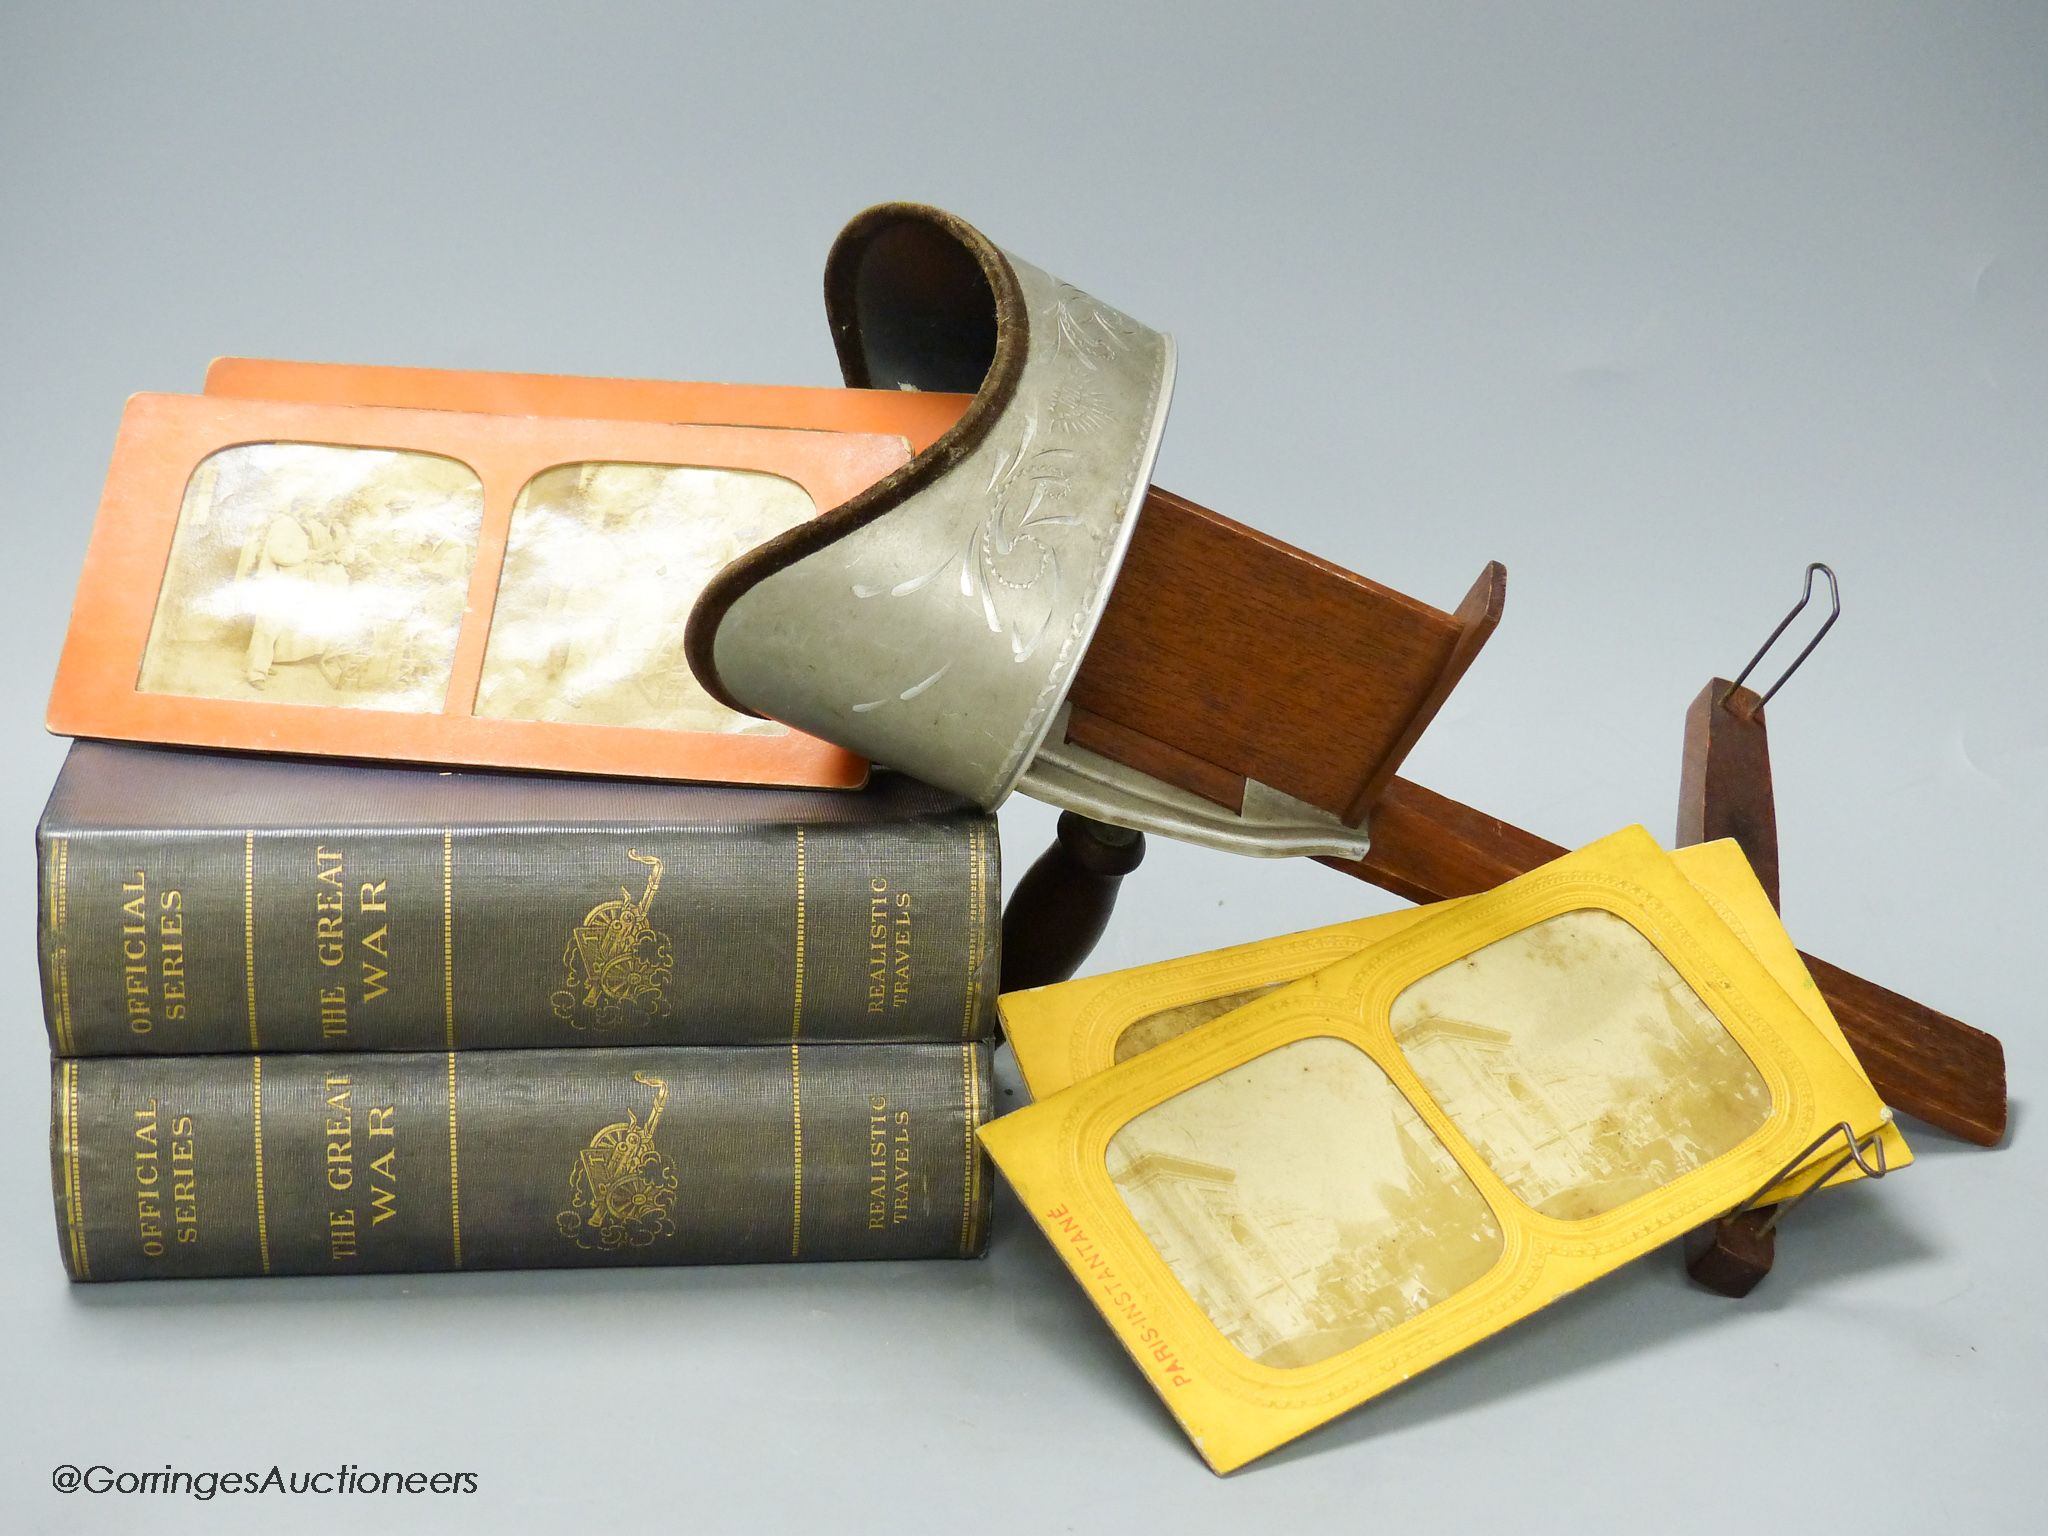 An Underwood & Underwood stereoscopic viewer, a collection of Realistic Travels 'The Great War' slides in book form case and twenty loose slides